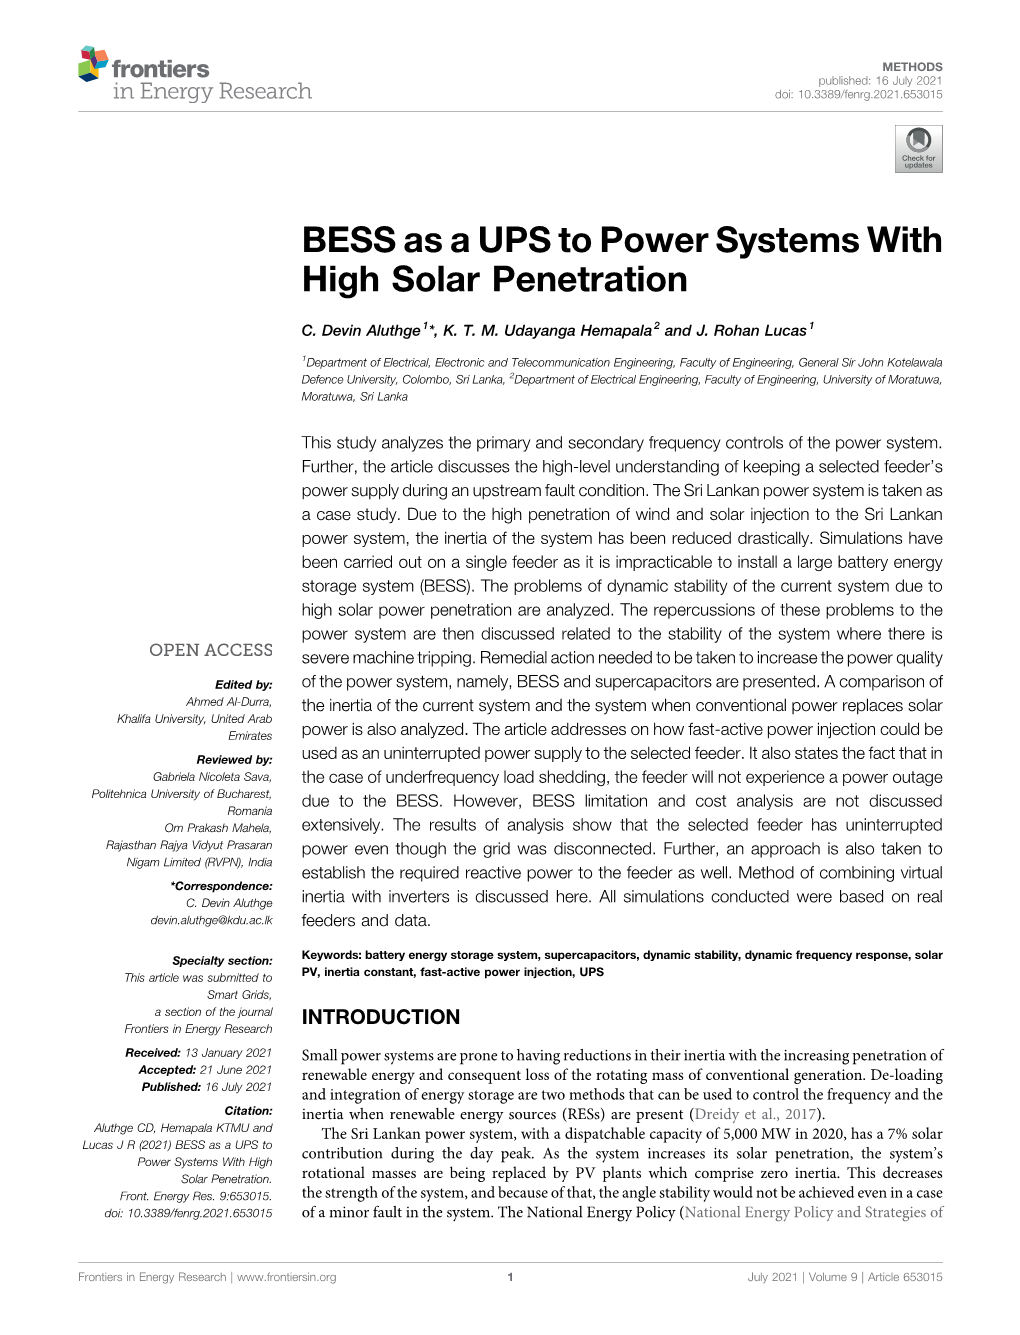 BESS As a UPS to Power Systems with High Solar Penetration